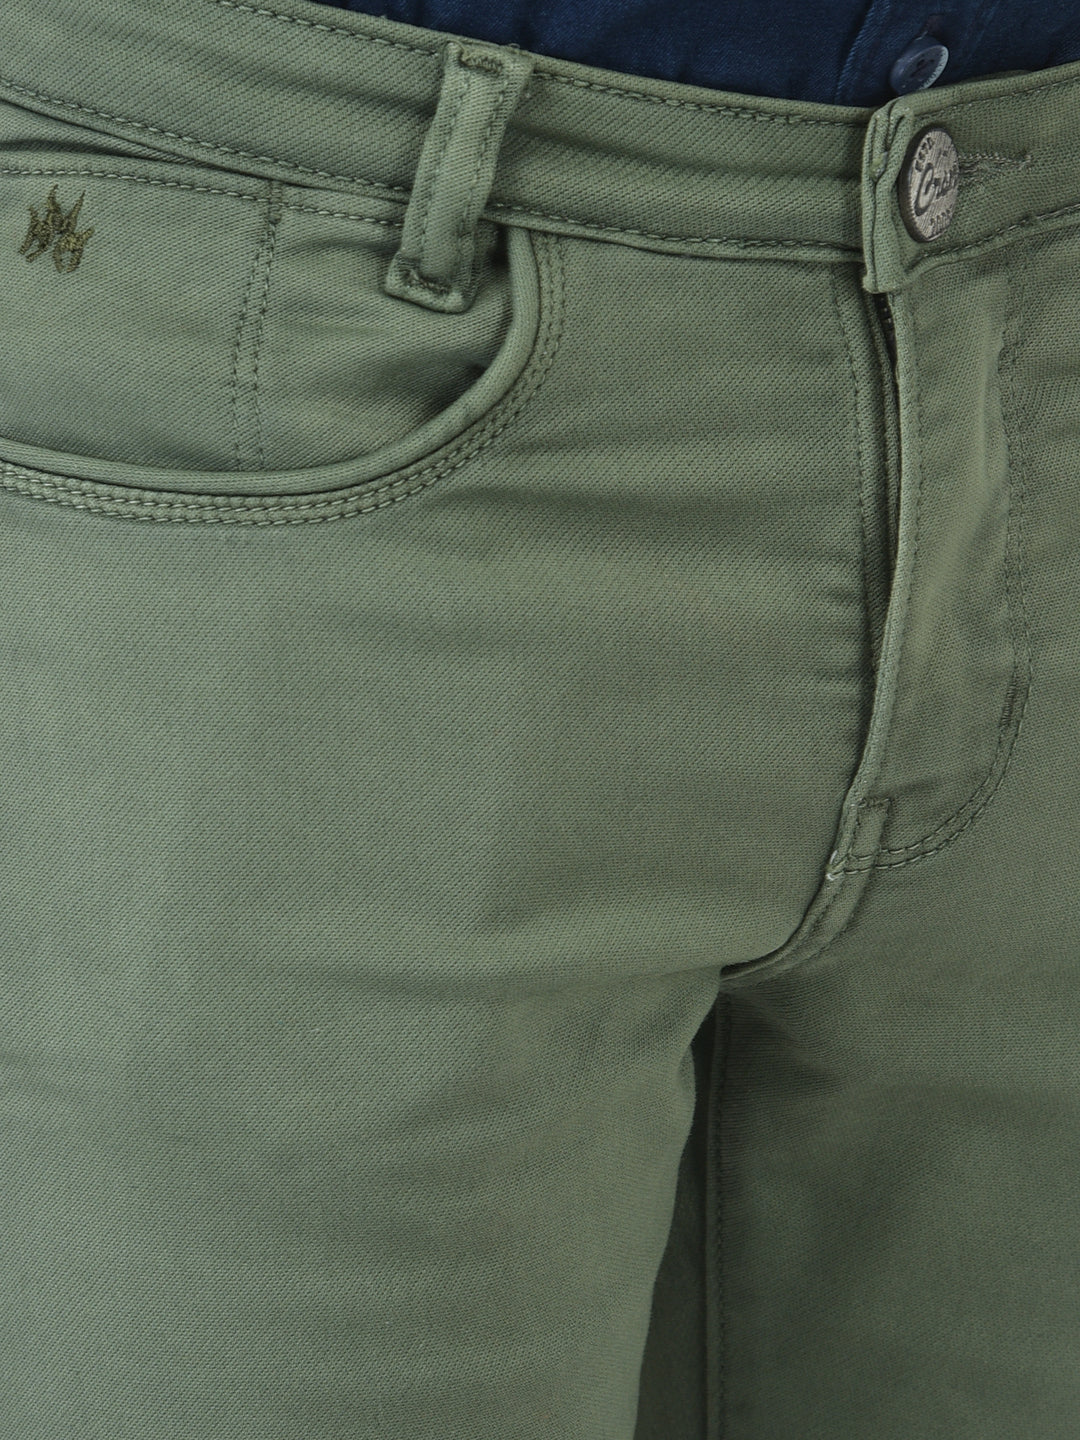 Olive Trouser - Boys Trousers